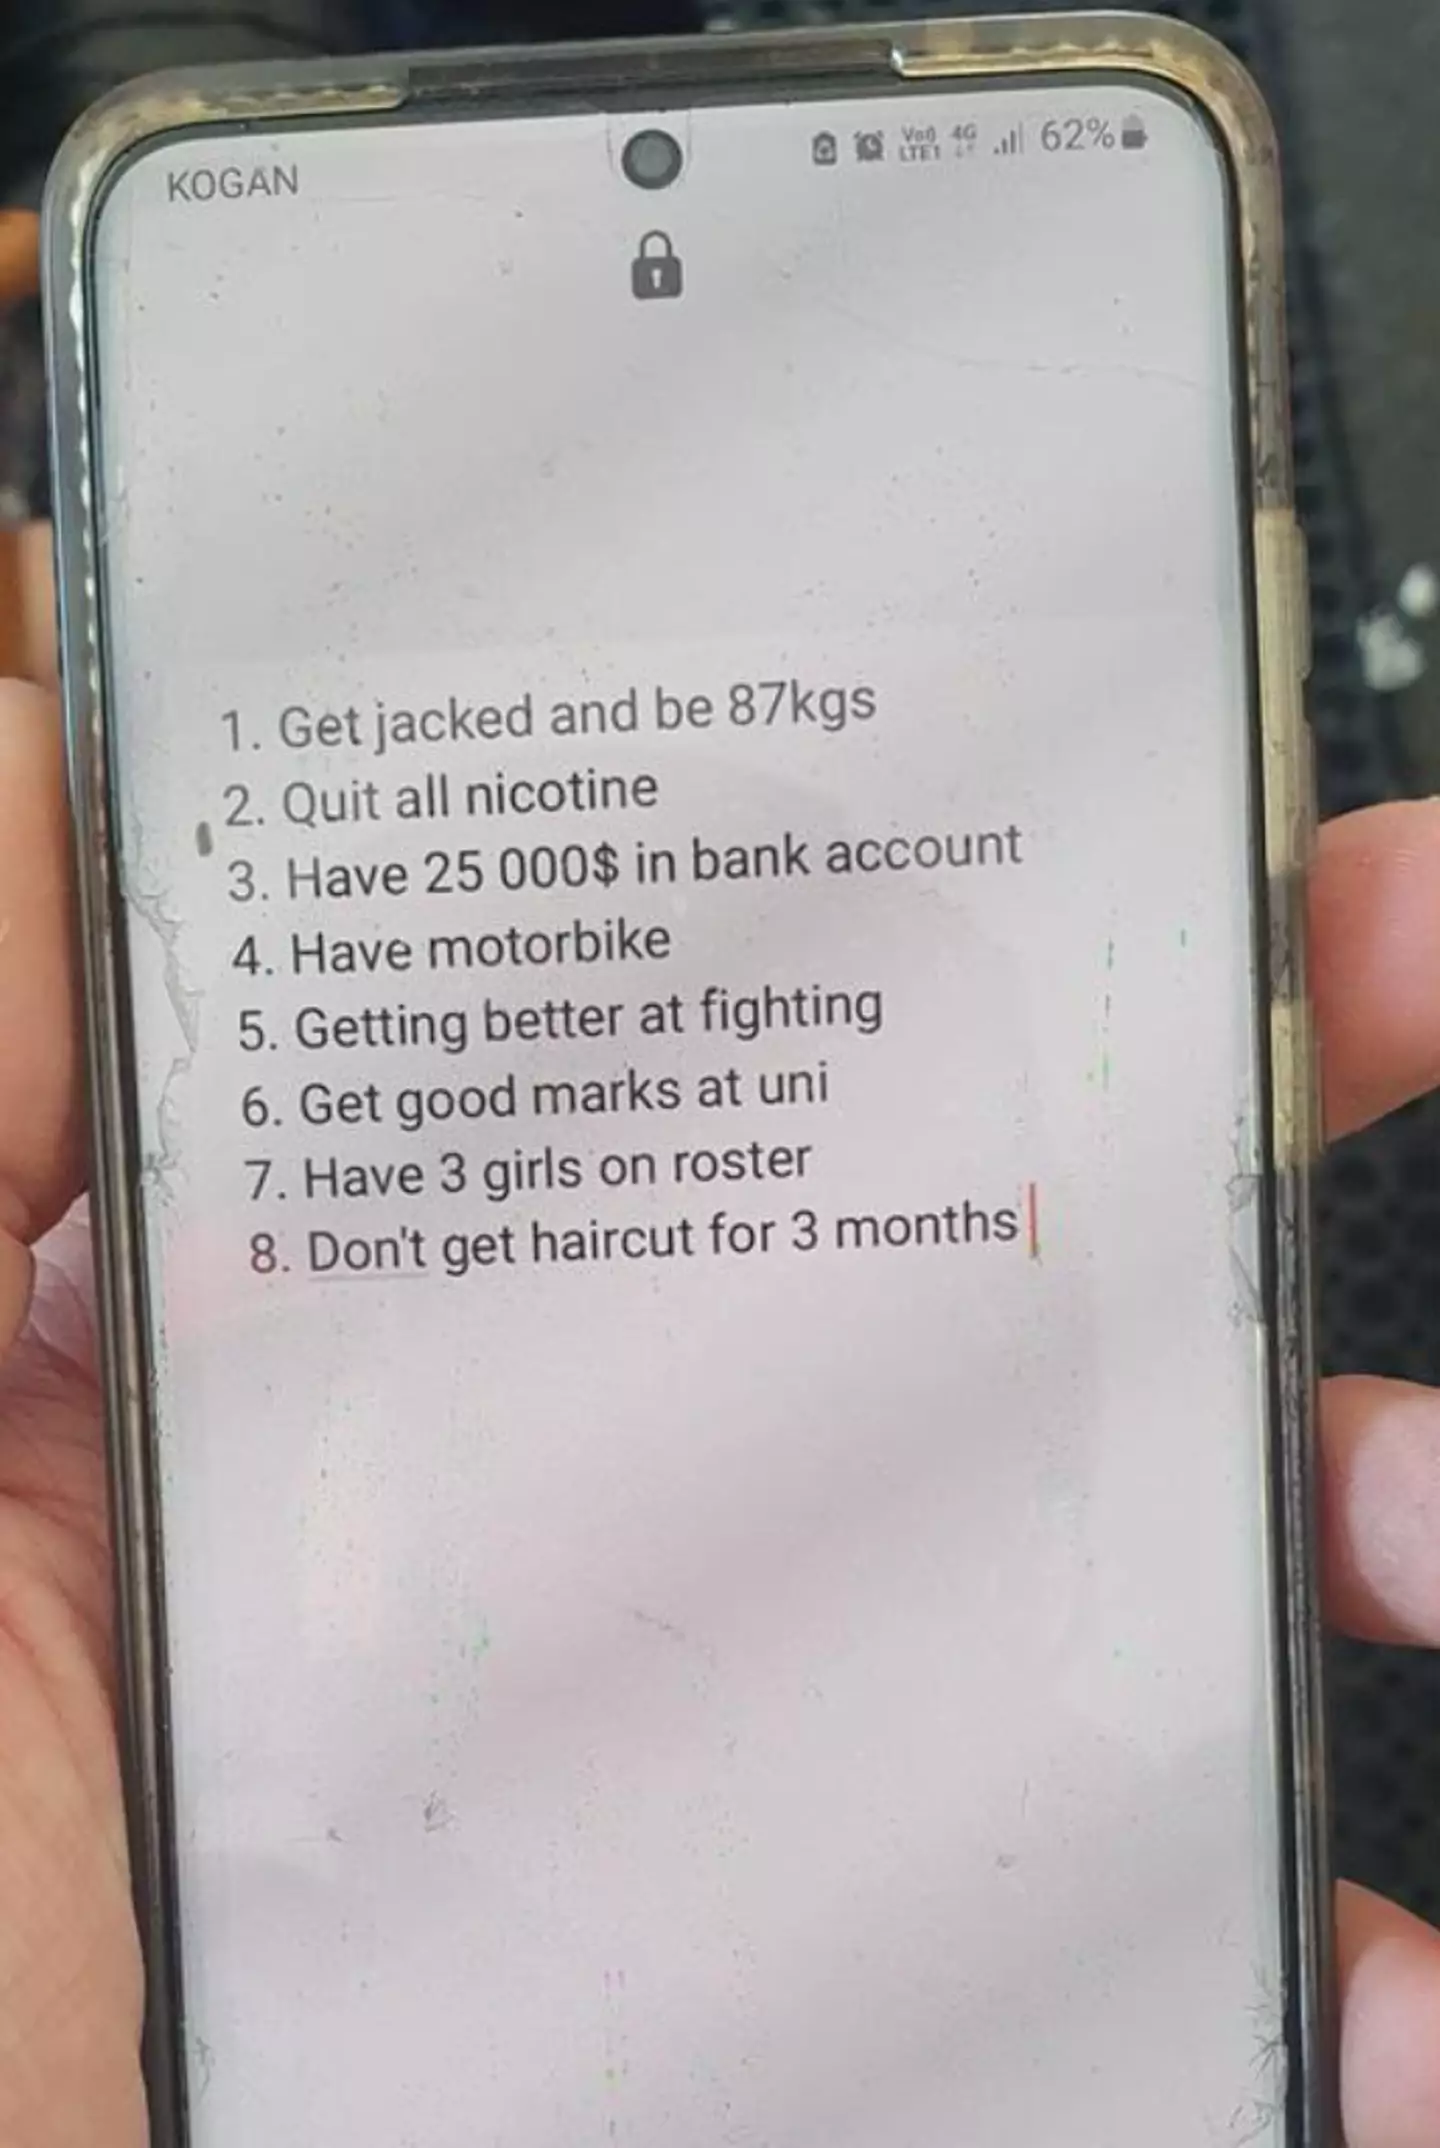 The lock screen revealed the user's goals.